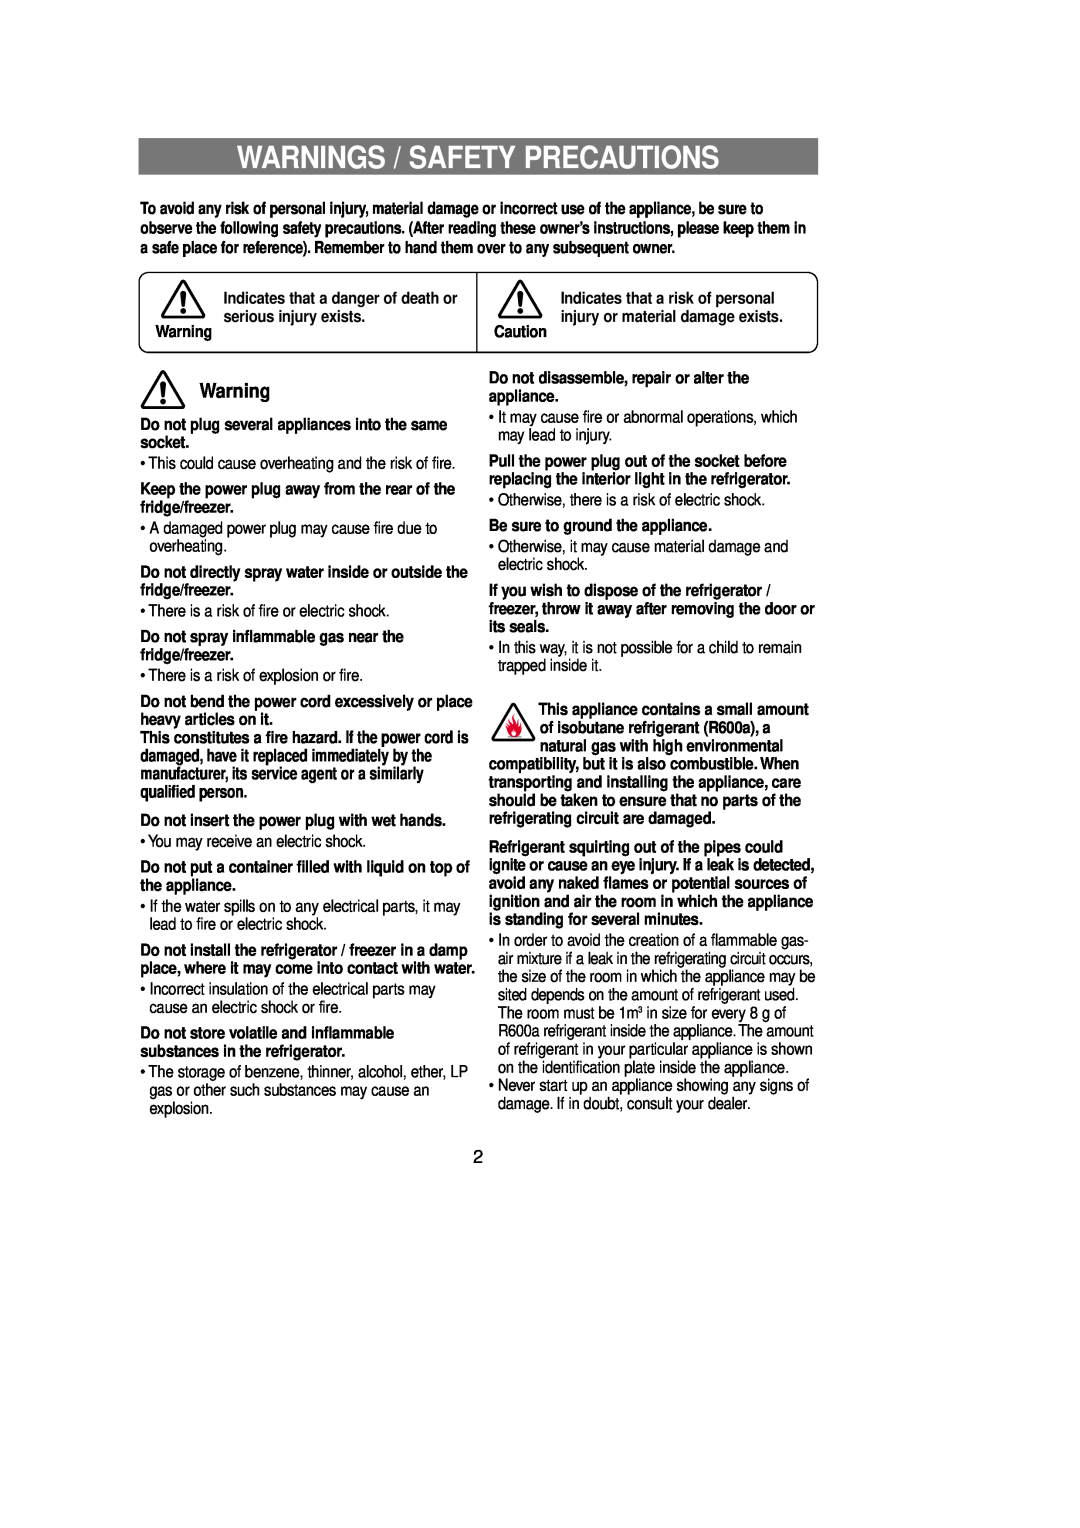 Samsung Rl 39 manual Warnings / Safety Precautions, Indicates that a danger of death or, serious injury exists. Warning 